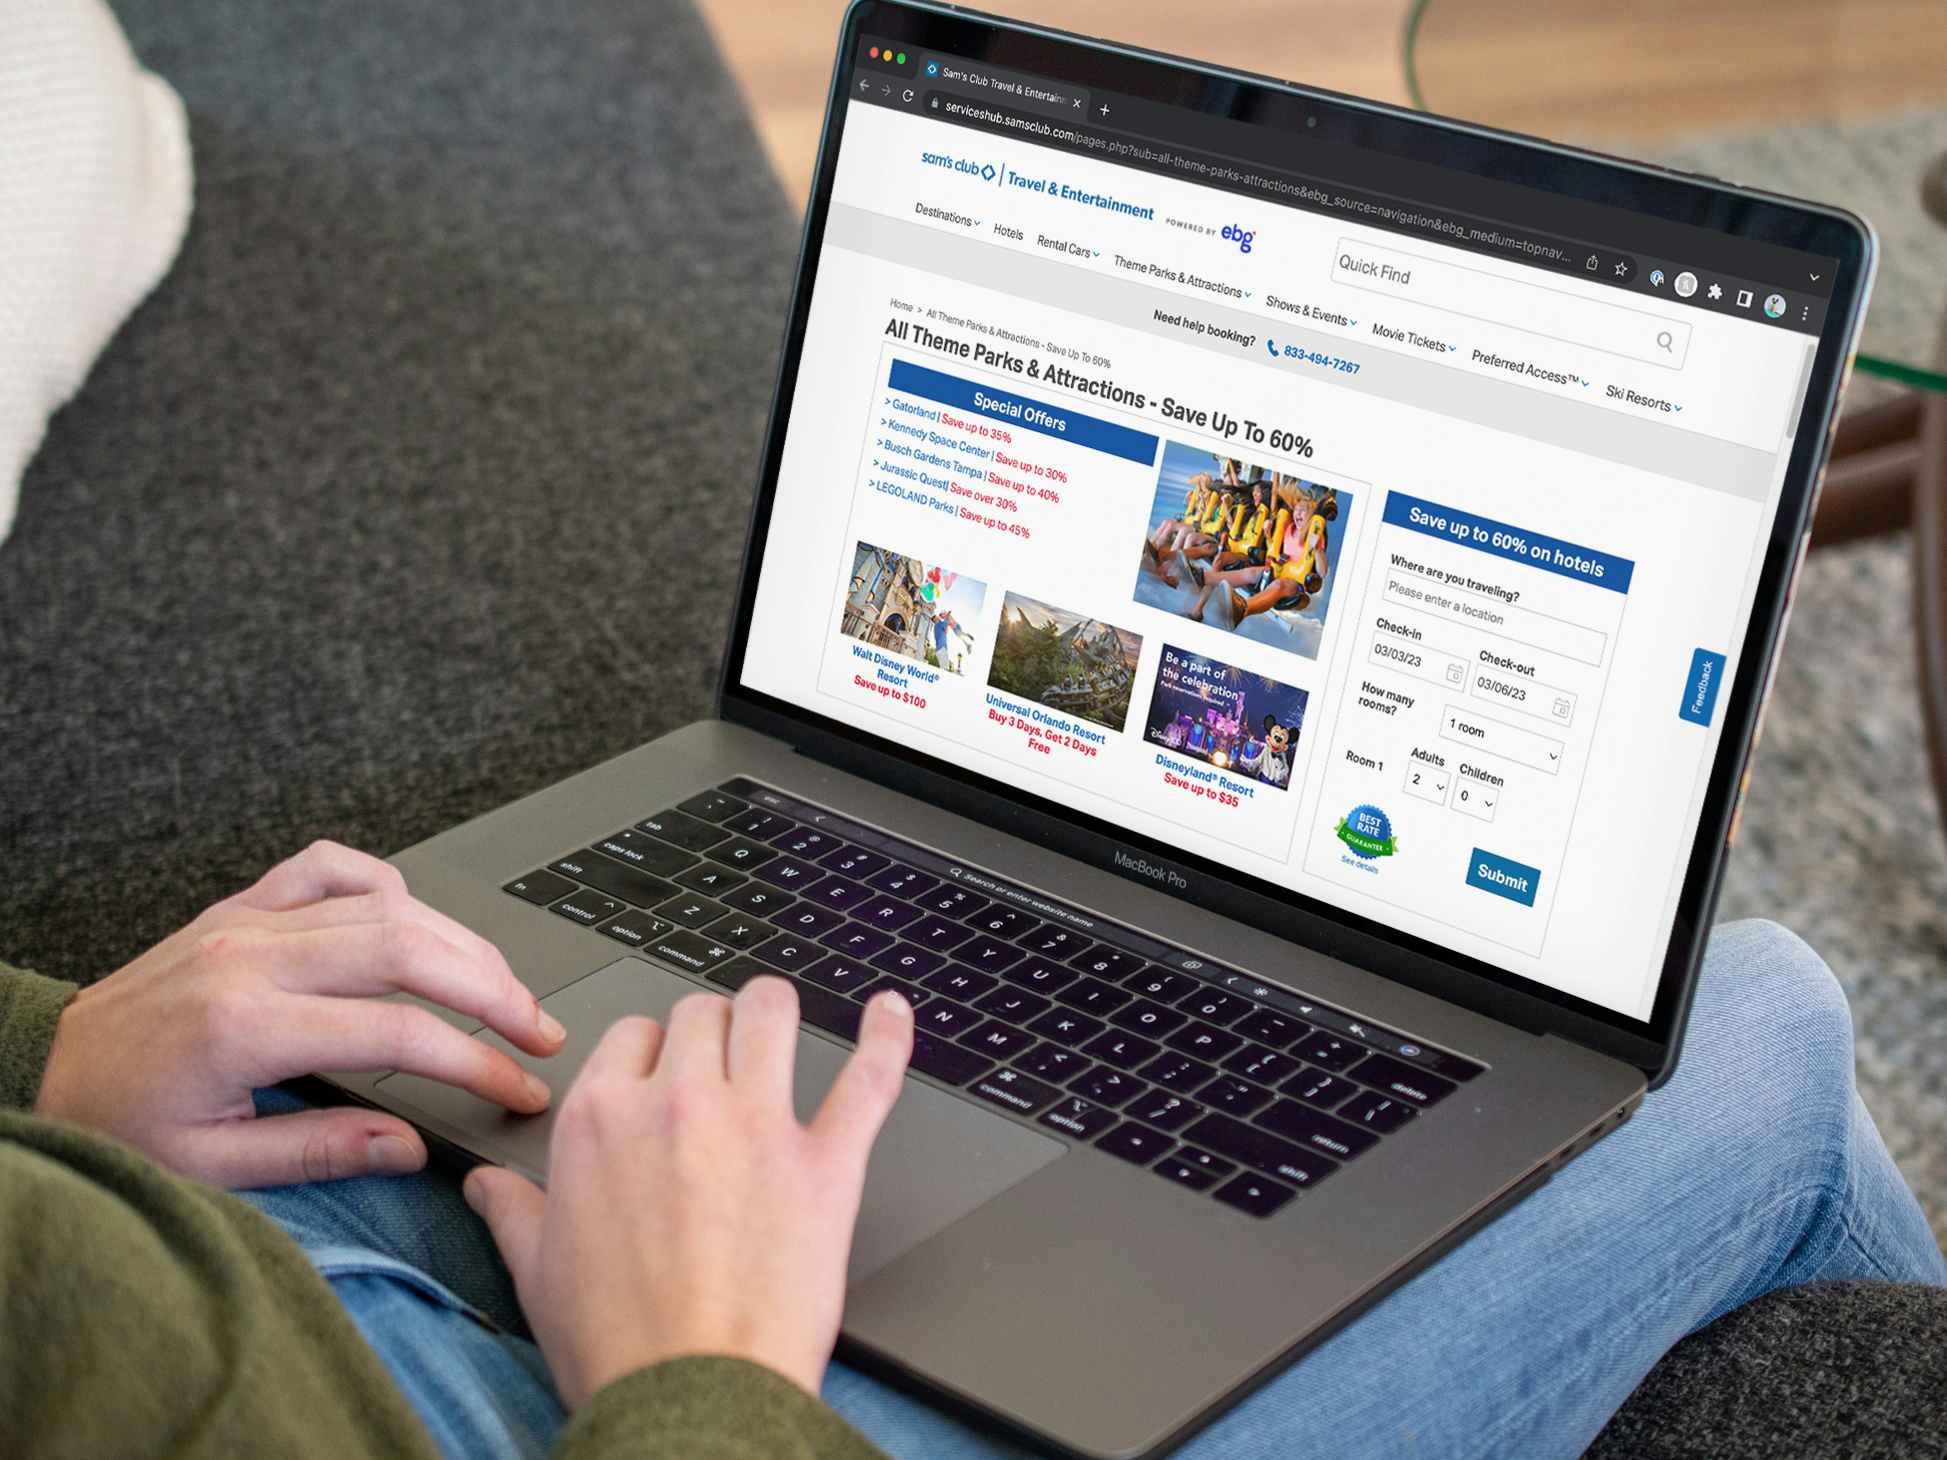 Someone looking at deals on the Sam's Club Travel & Entertainment website